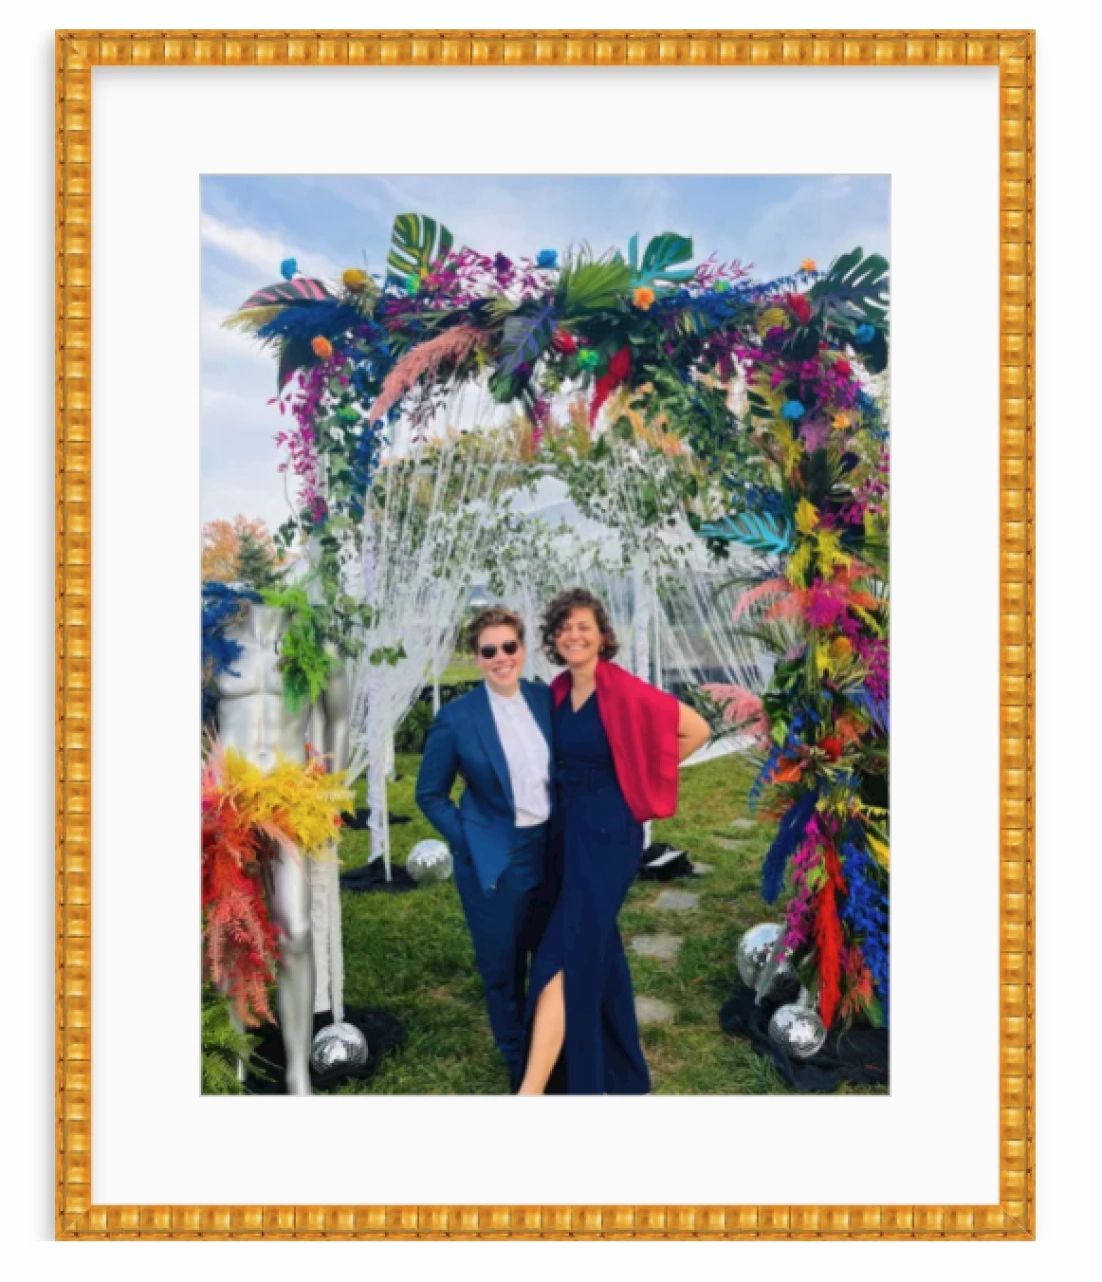 Couple in front of colorful florals